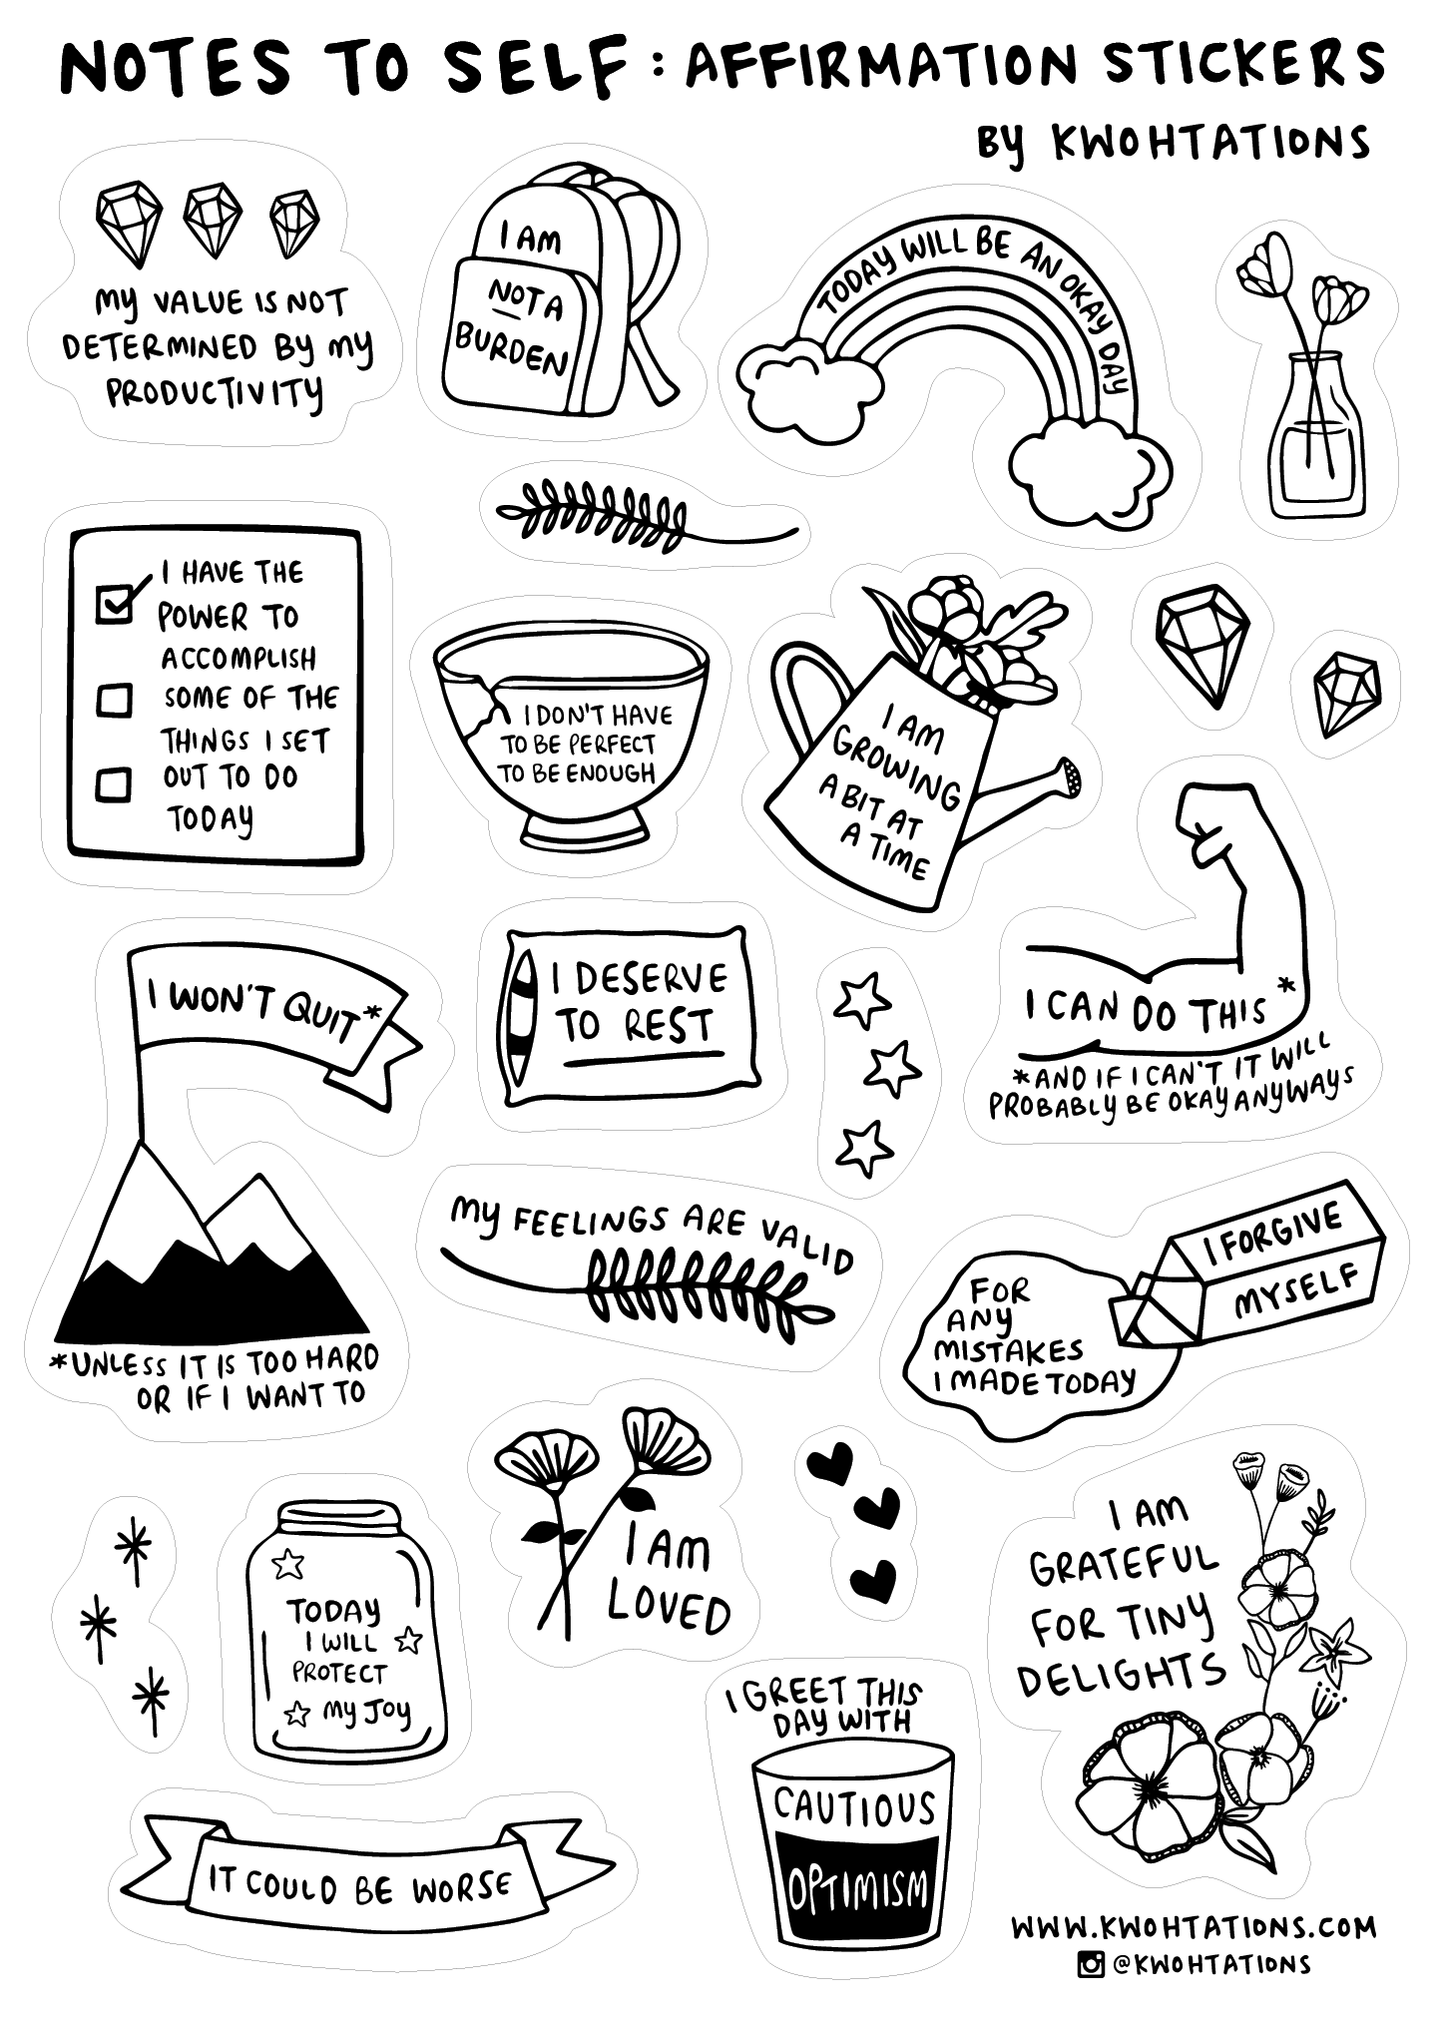 Kwohtations: Notes to Self Sticker Sheets